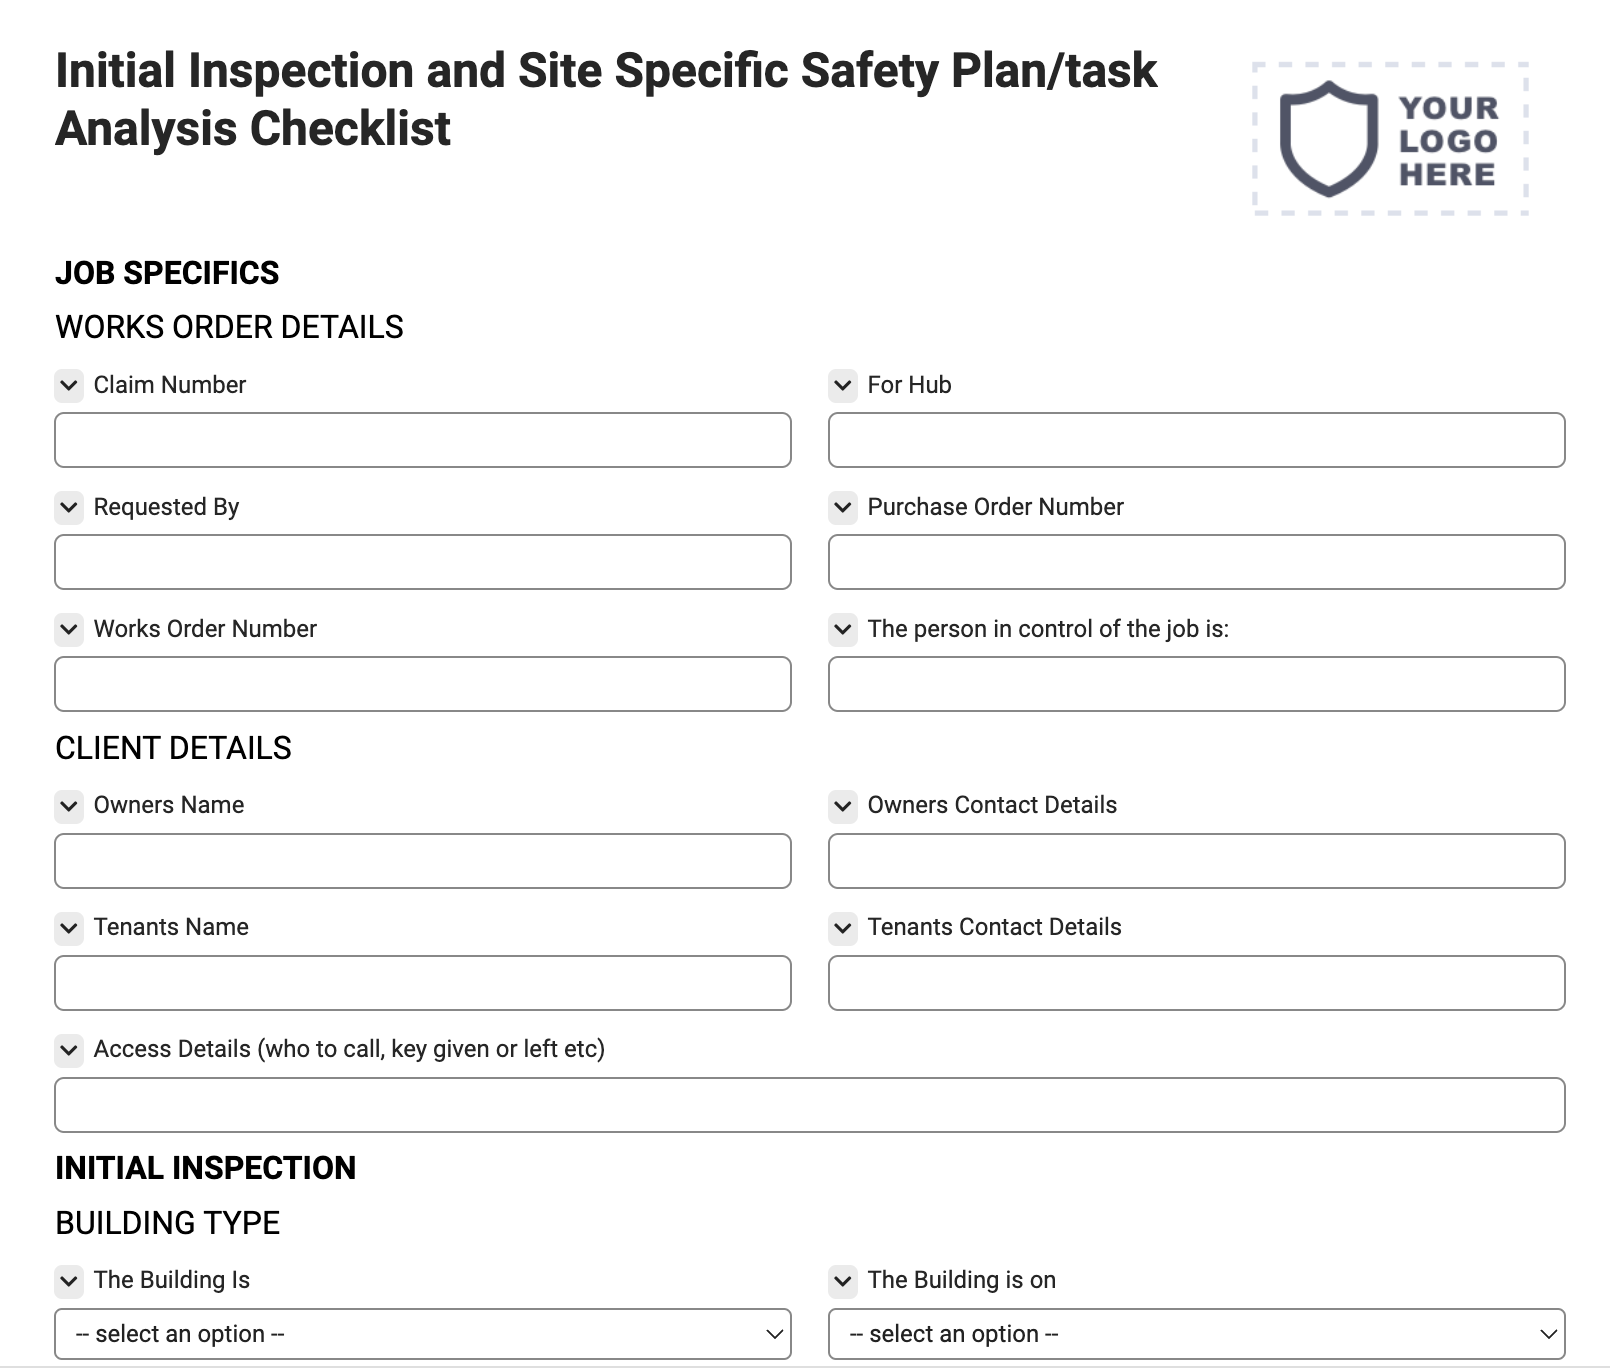 Initial Inspection and Site Specific Safety Plan/task Analysis Checklist